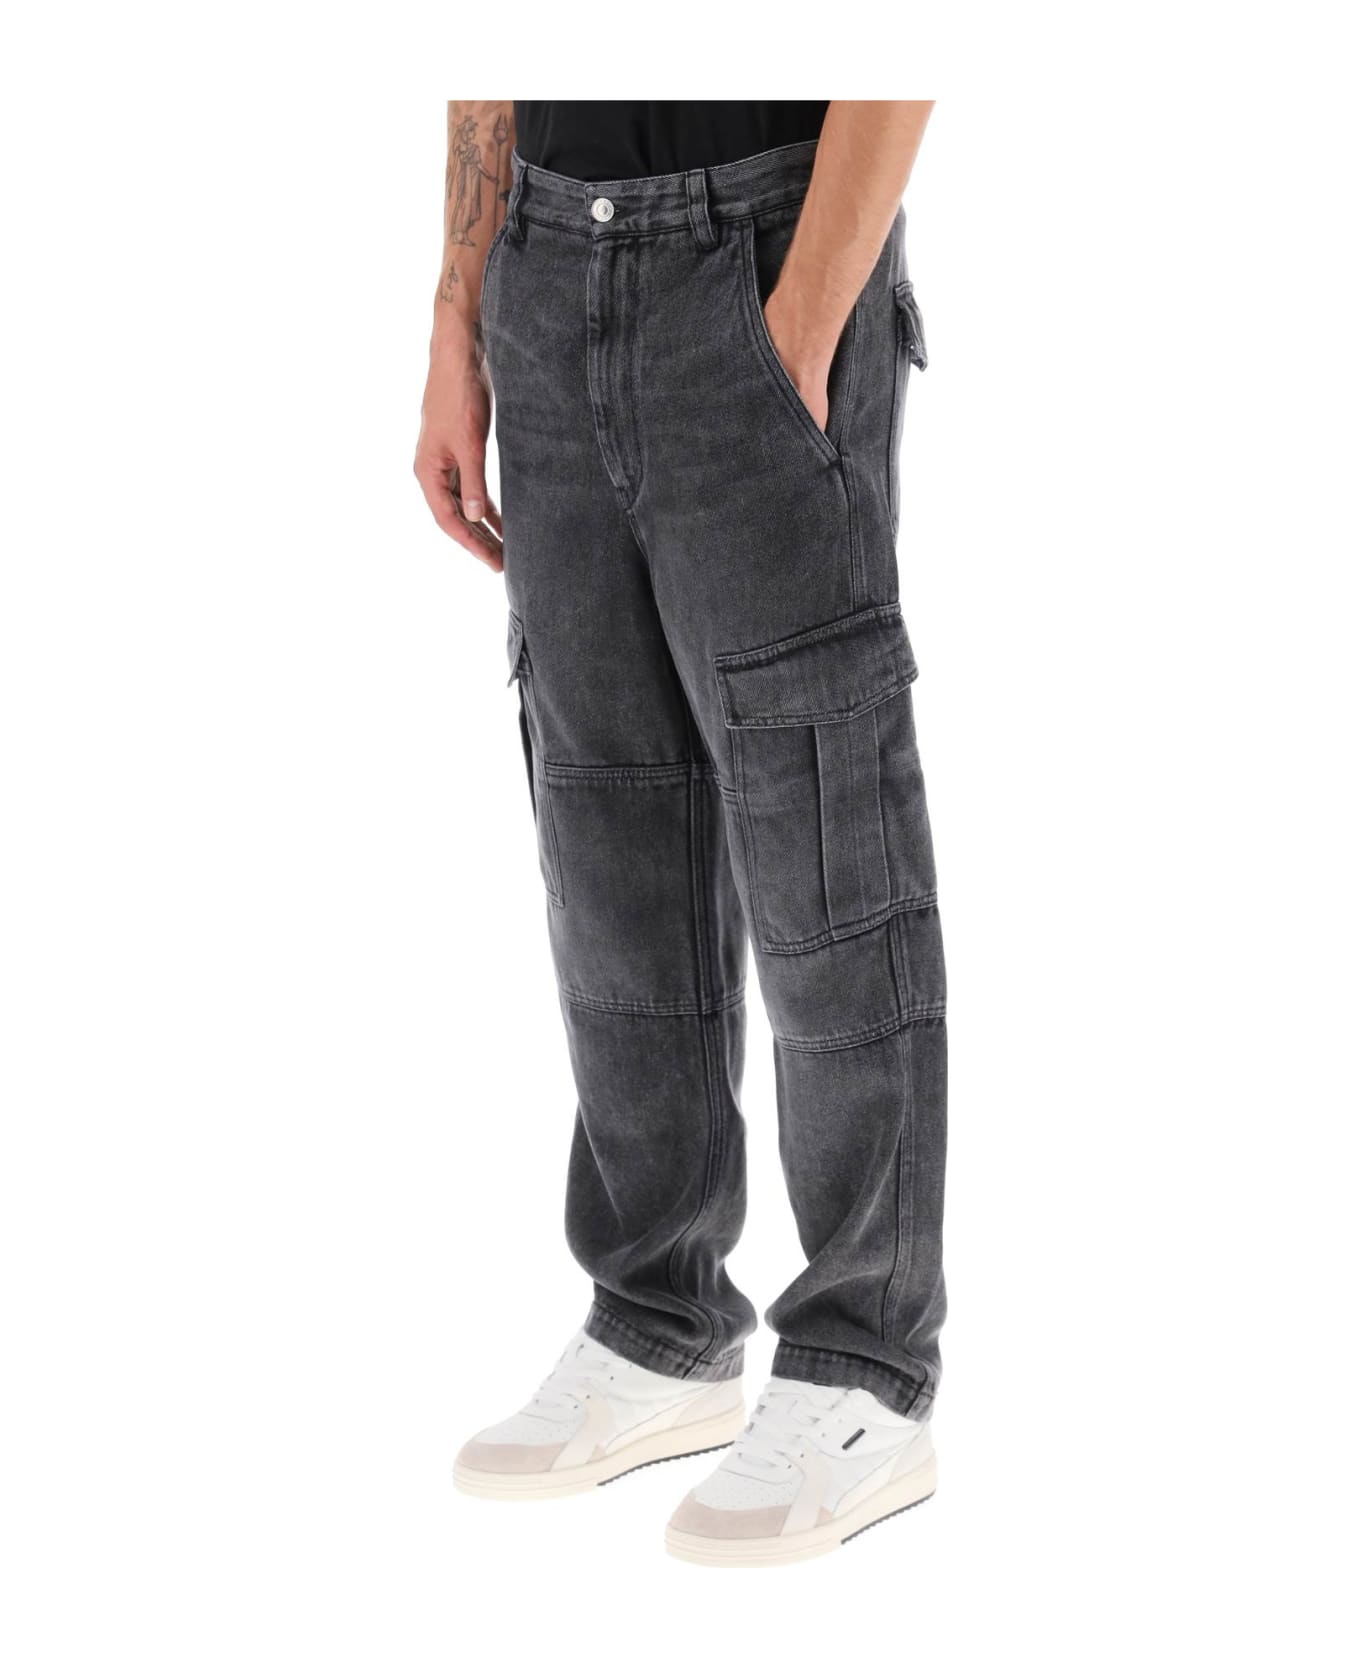 Isabel Marant Terence Cargo Jeans - GREY (Grey)